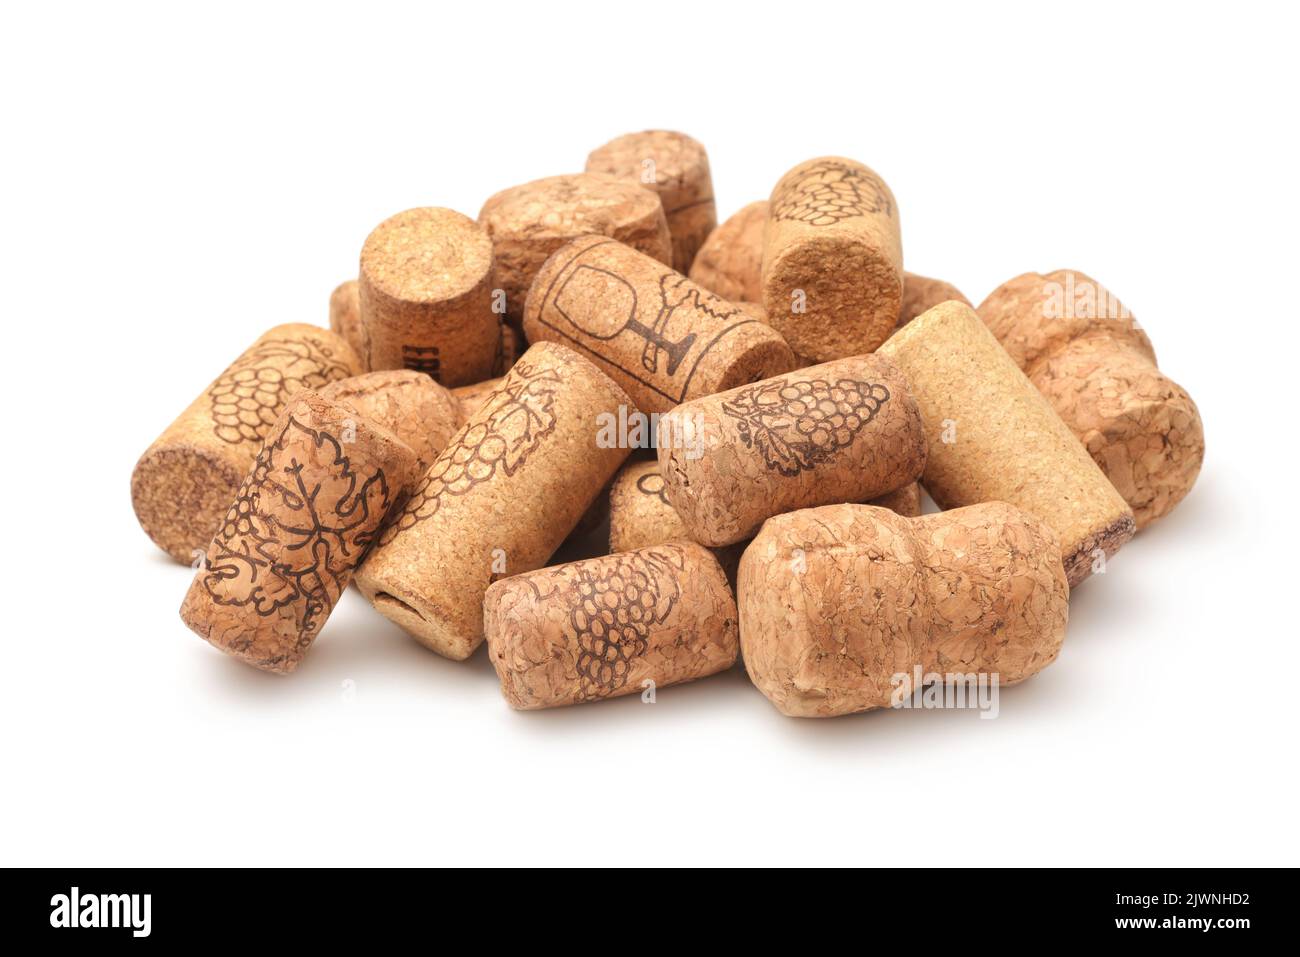 Pile of different natural wine corks isolated on white Stock Photo